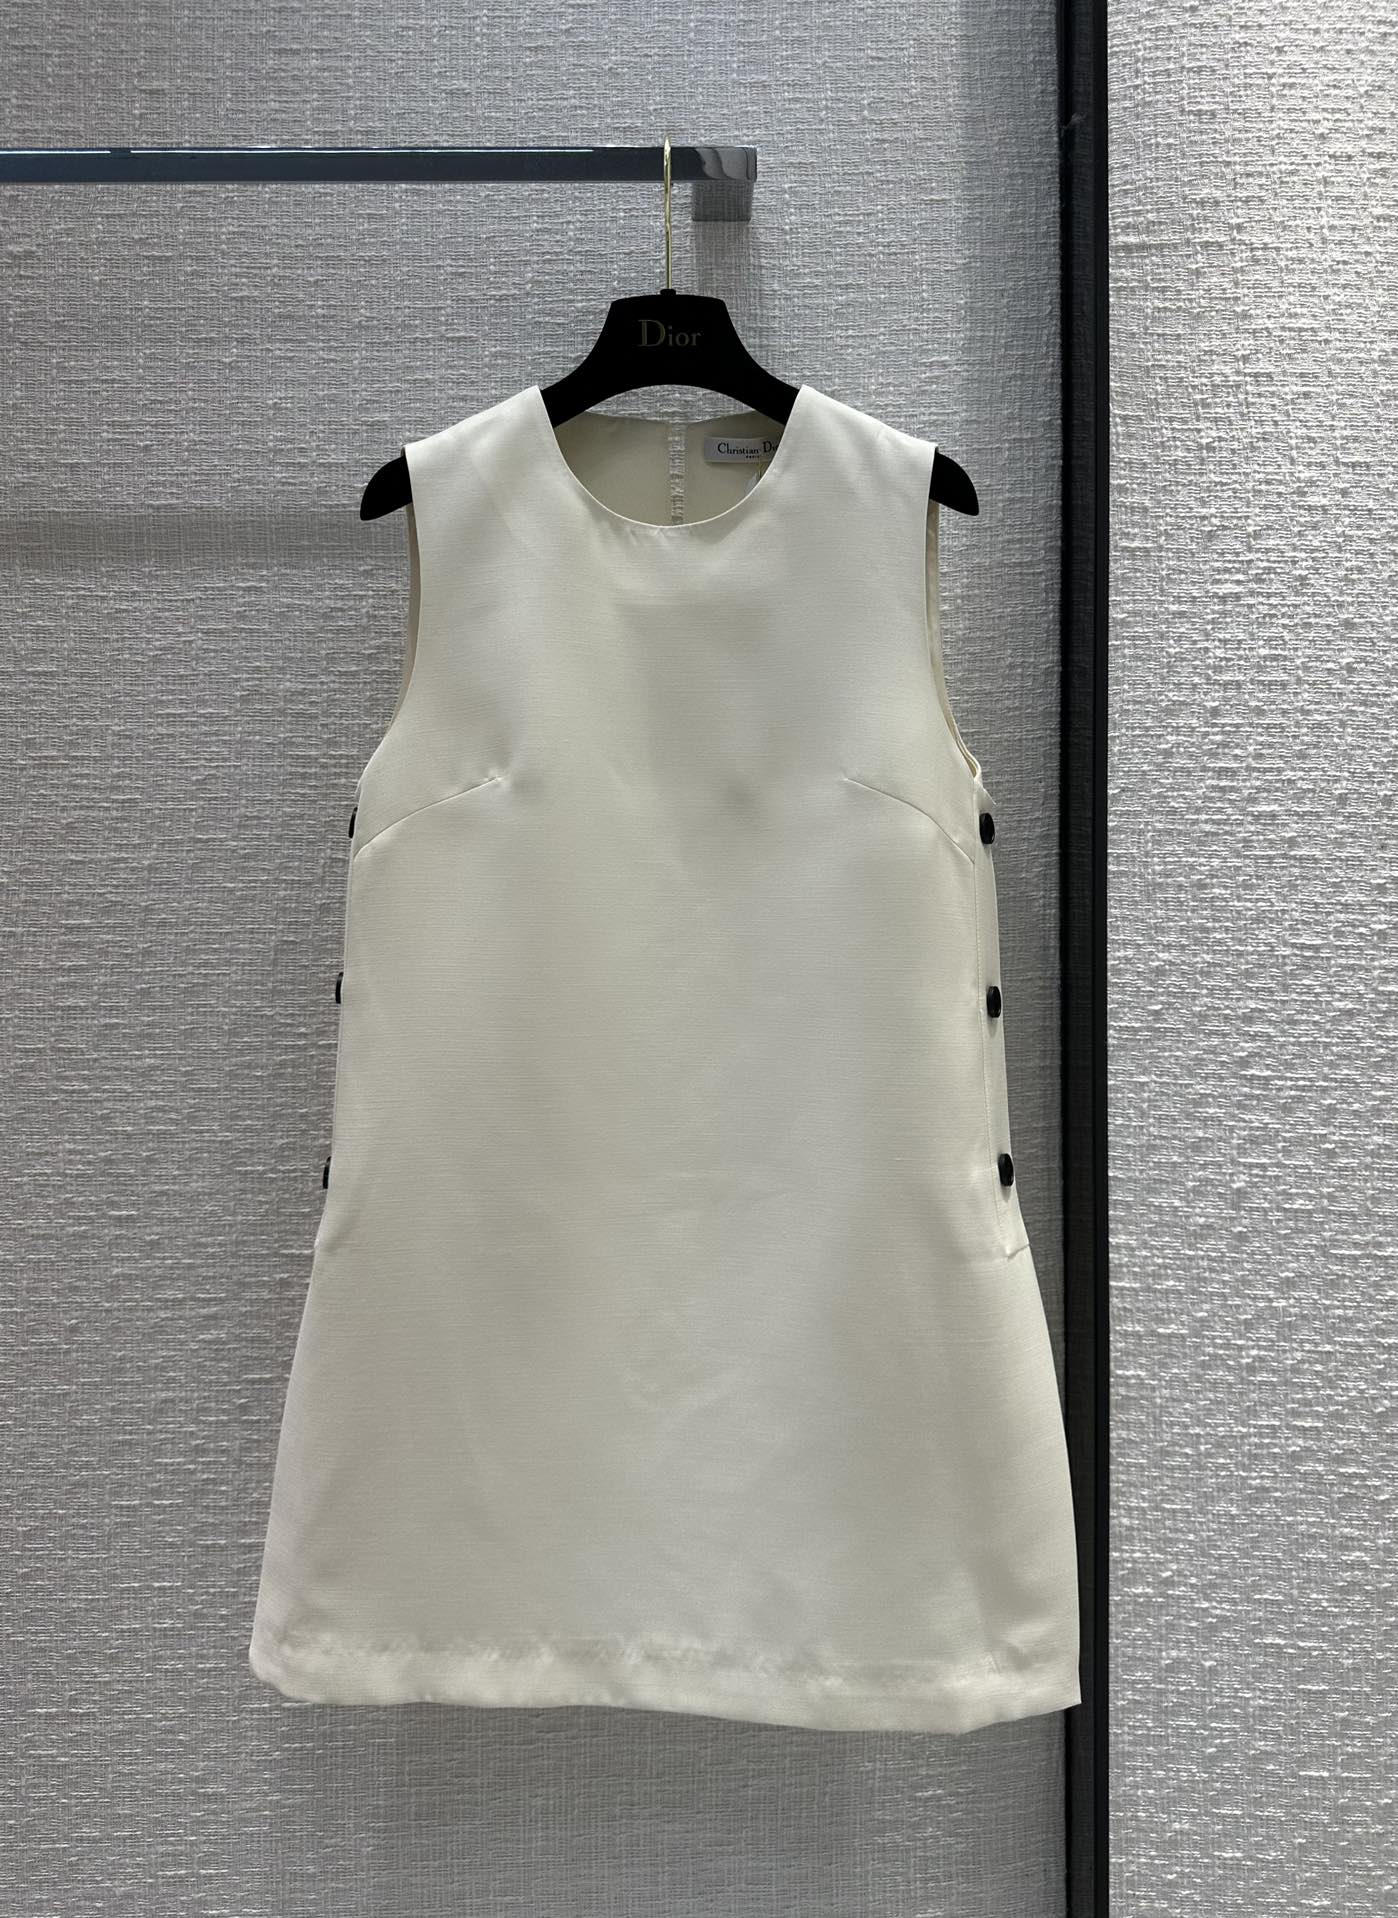 Dior Clothing Dresses Waistcoat Top Quality Designer Replica
 Fall/Winter Collection